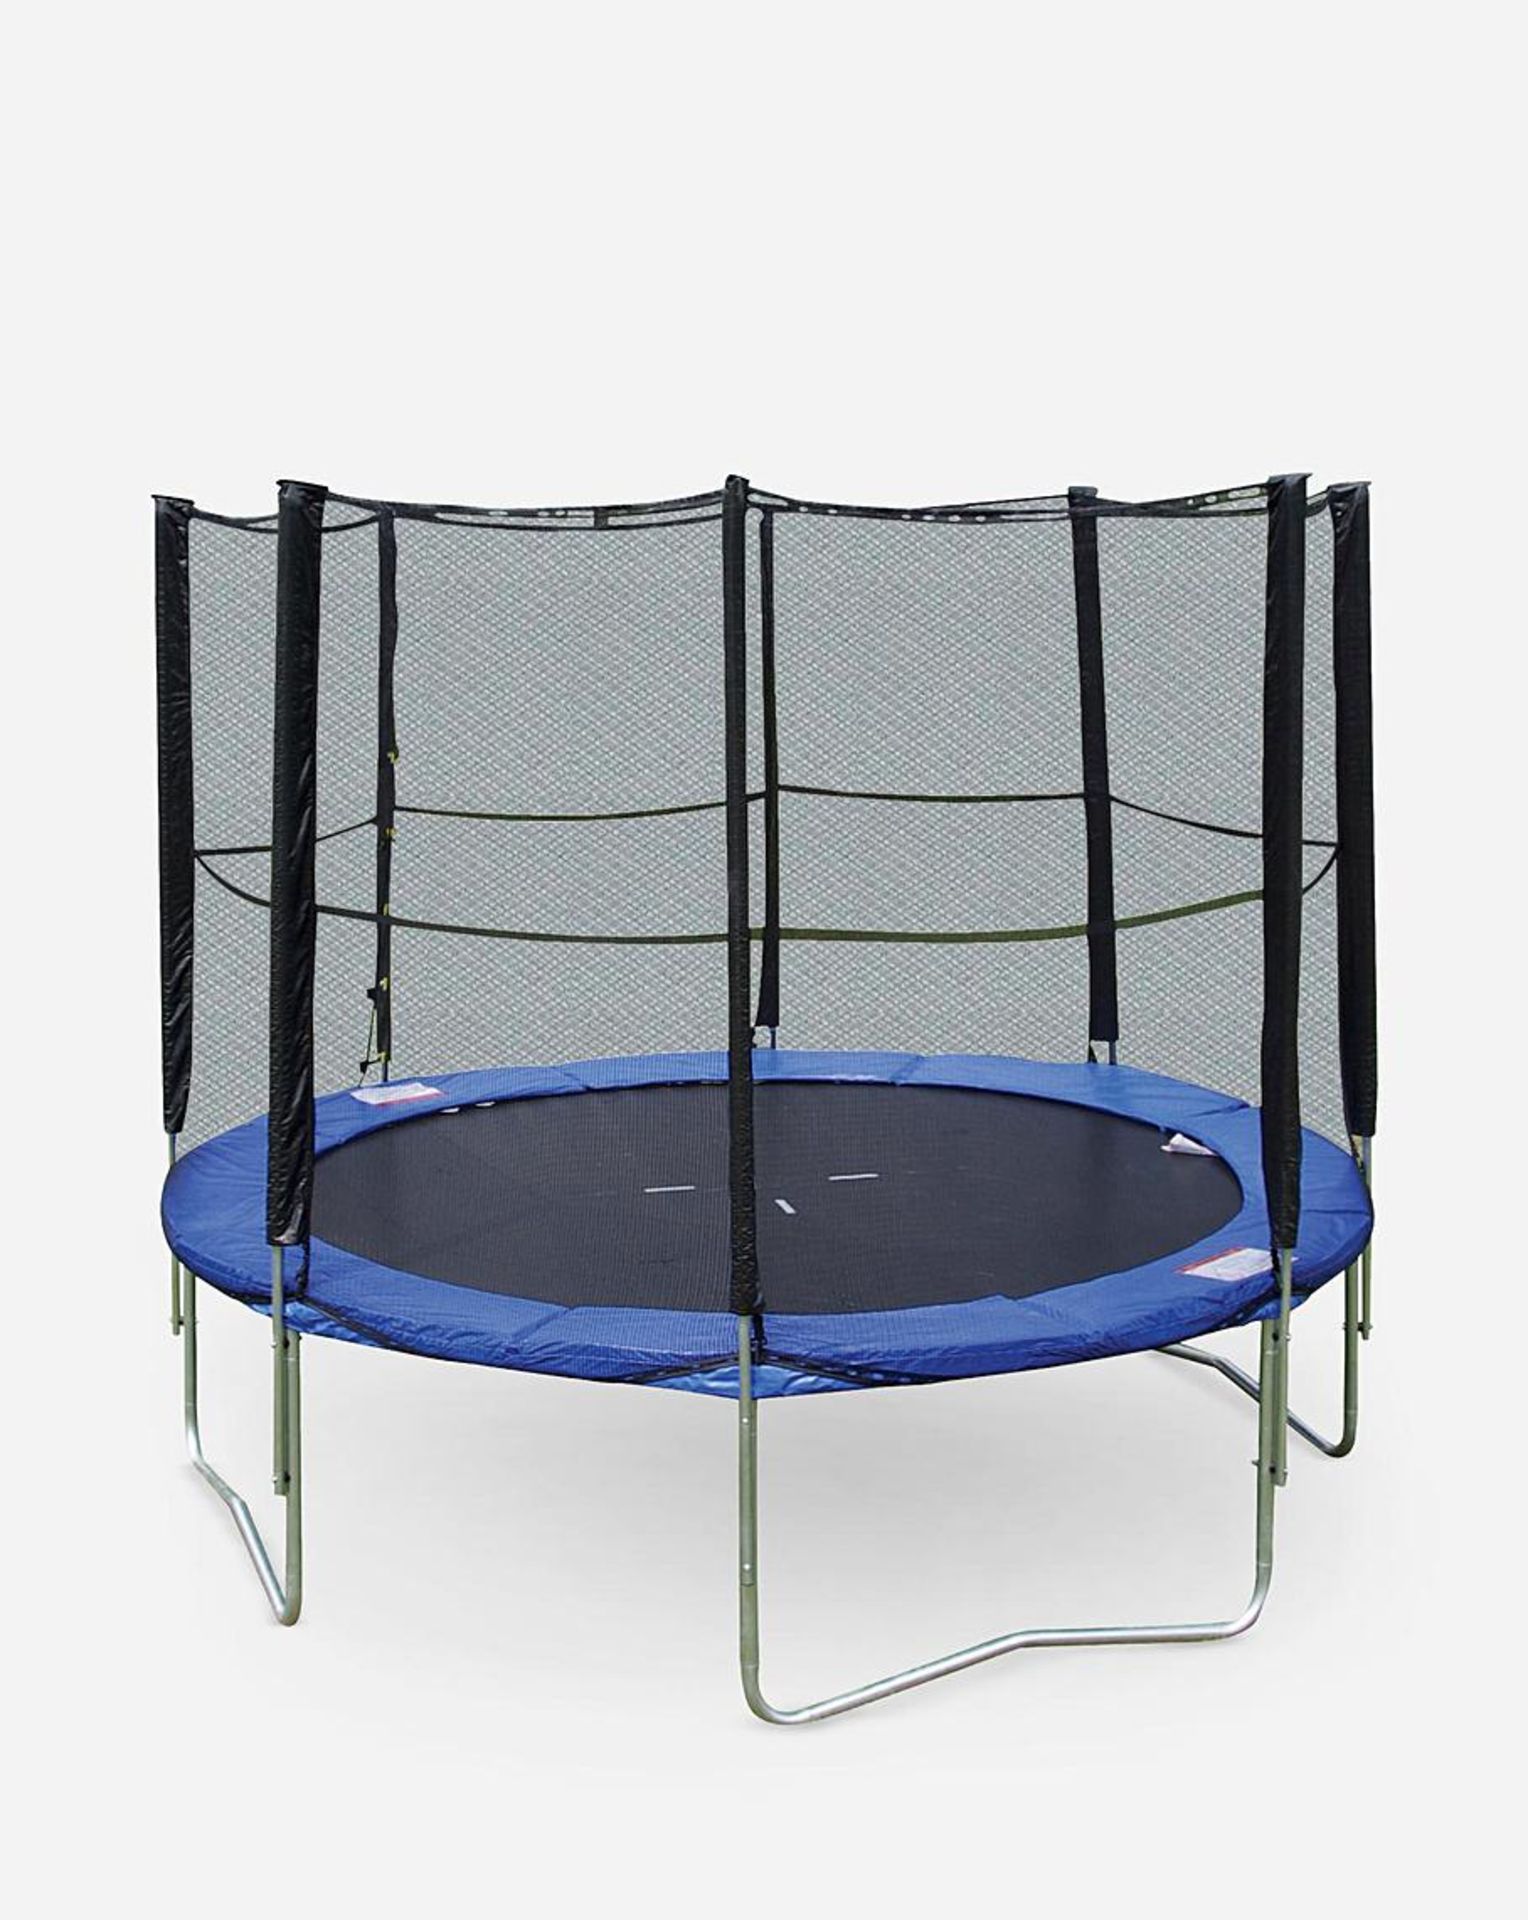 Hedstrom 6ft Trampoline with Enclosure. - SR4. Suitable for year round use. Fully coated